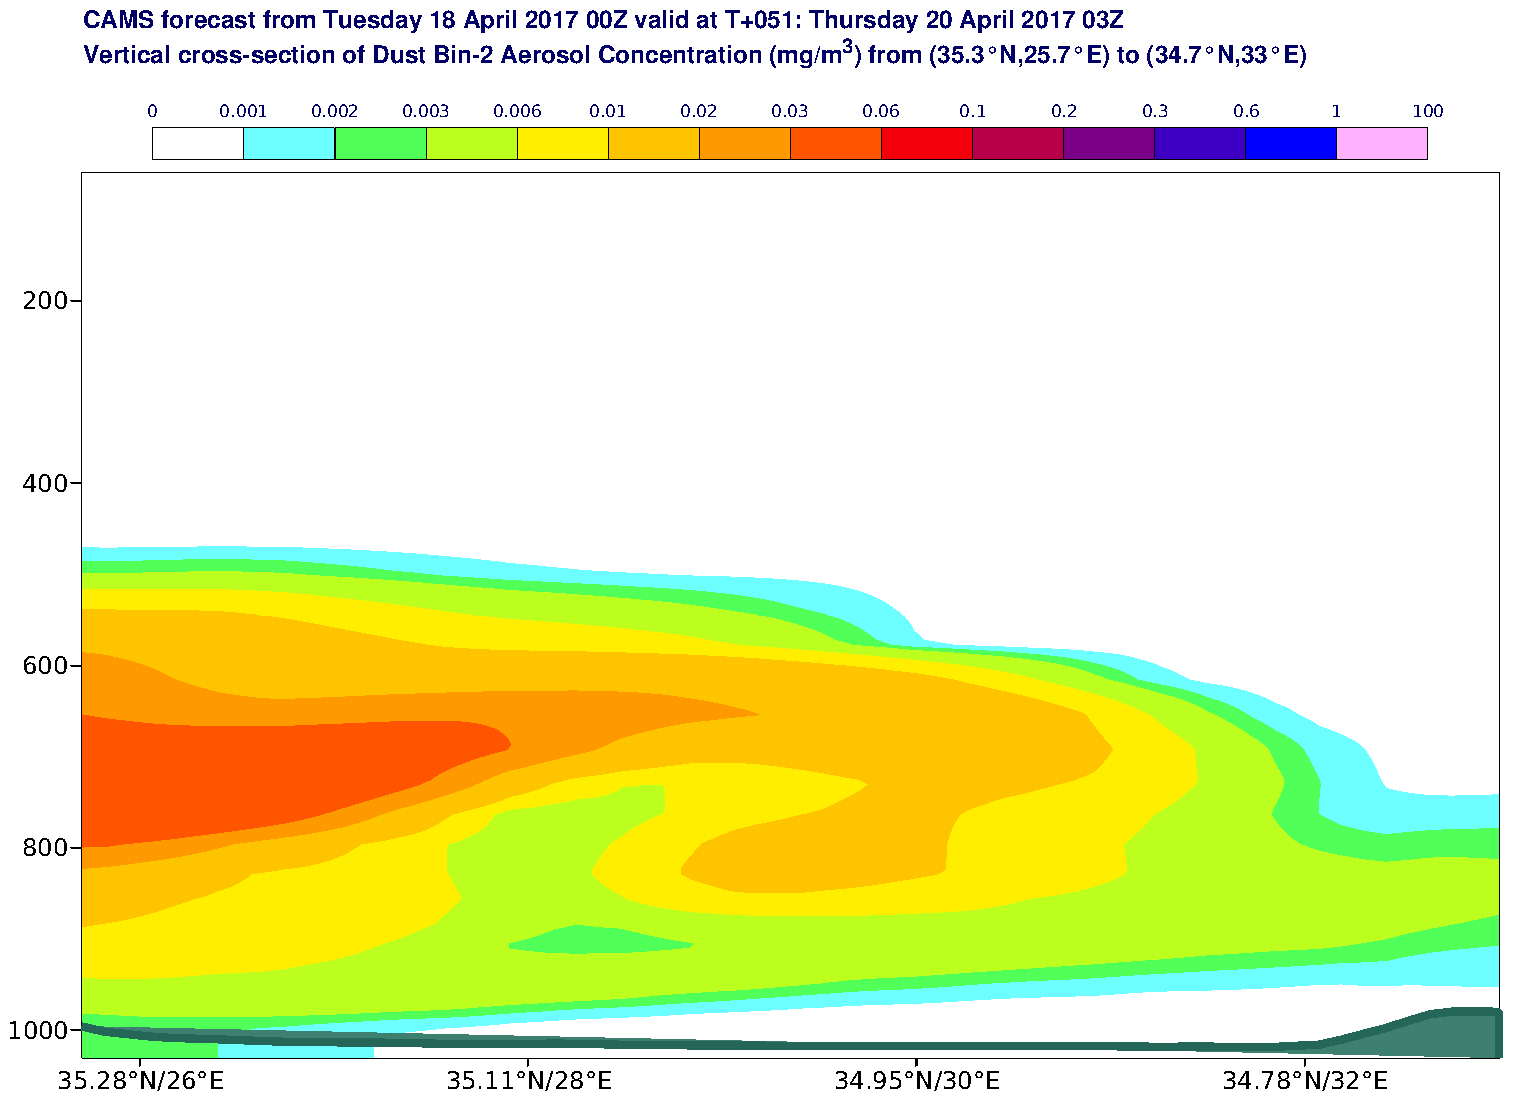 Vertical cross-section of Dust Bin-2 Aerosol Concentration (mg/m3) valid at T51 - 2017-04-20 03:00